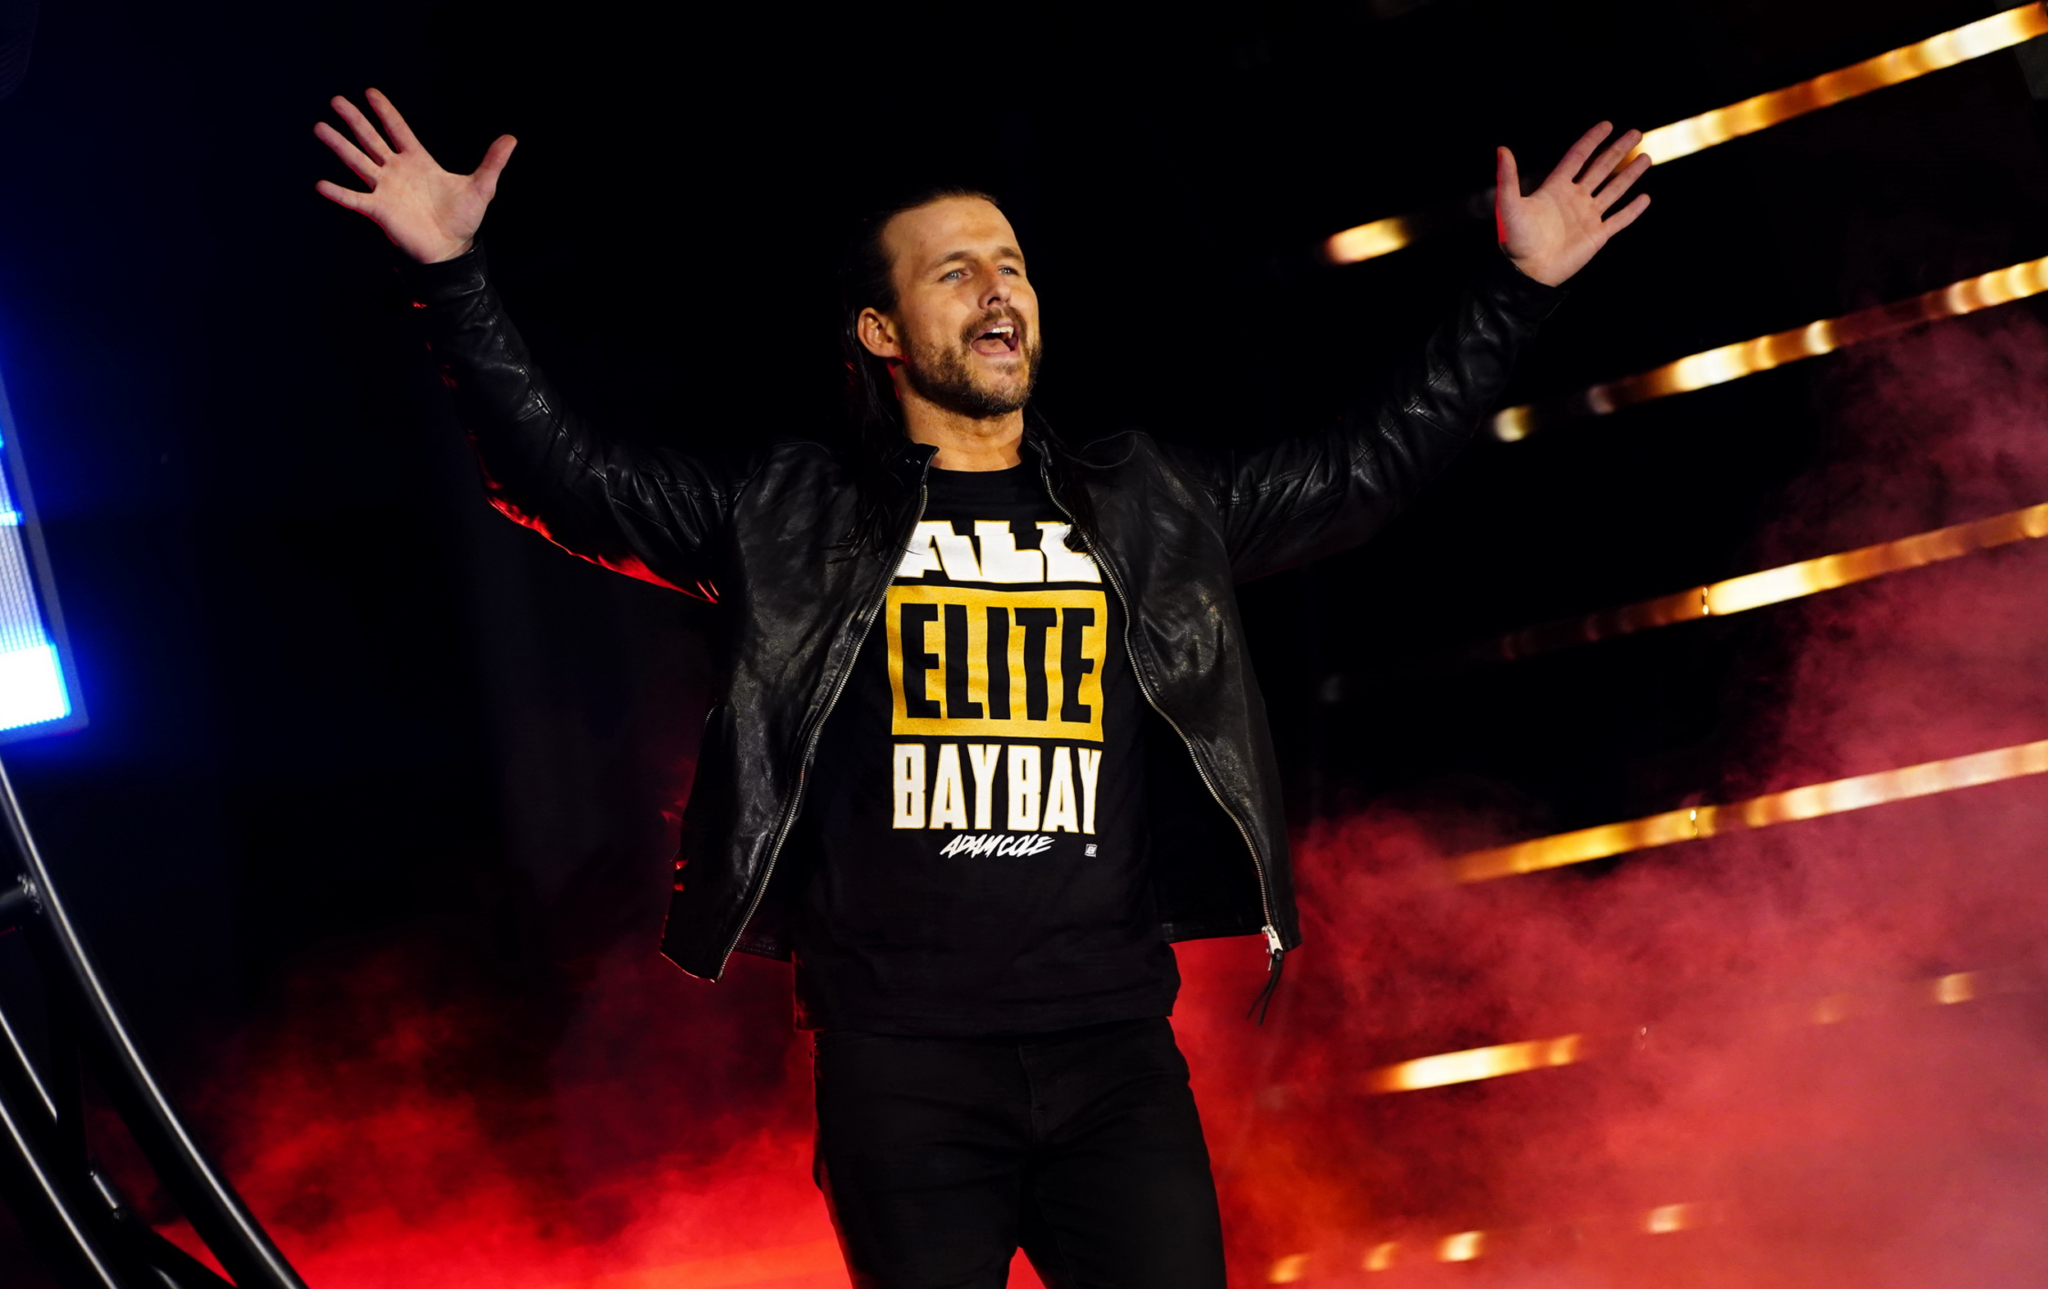 Adam Cole Says On March 29 The AEW Fans Are Gonna Get The Absolute Best Version Of Him That There Has Ever Been